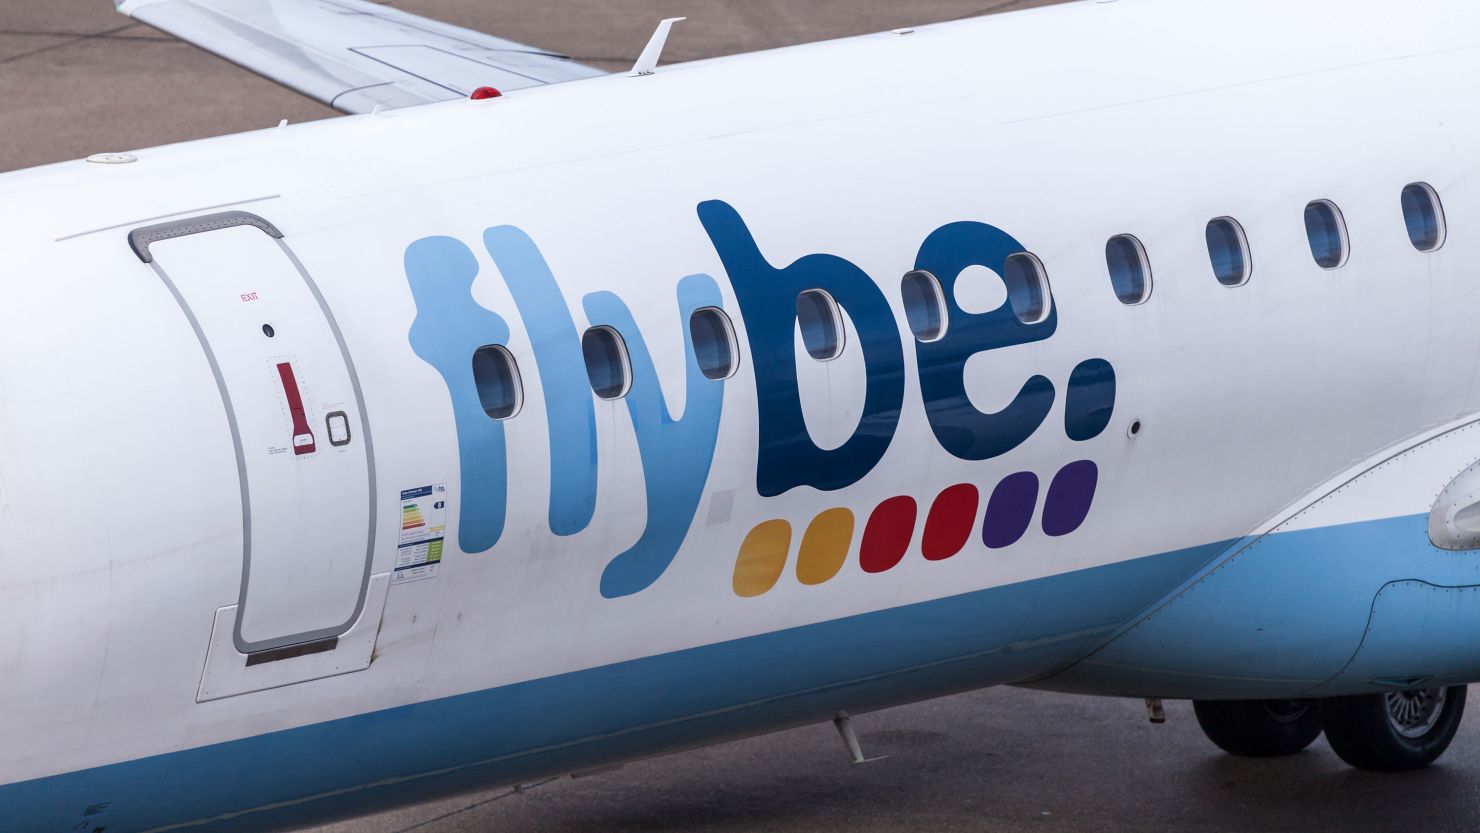 A file image shows a Flybe aircraft in October 2017.